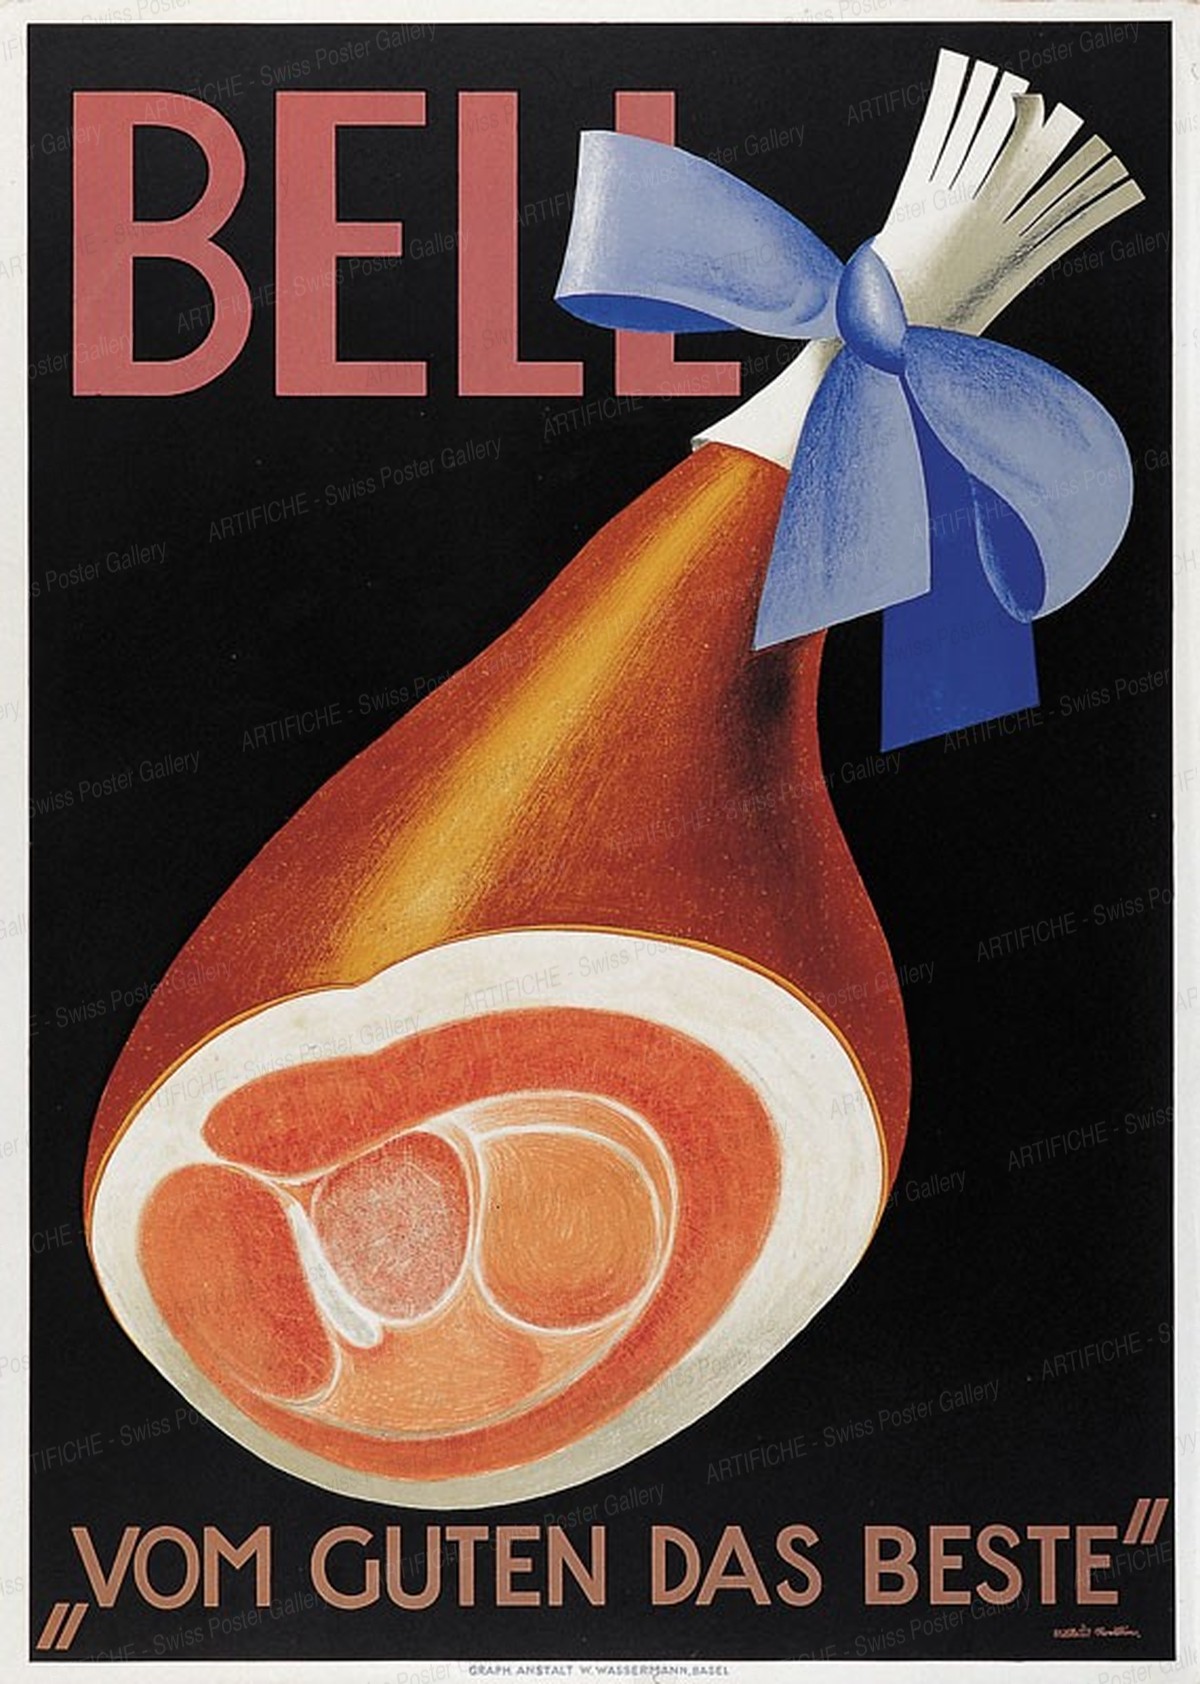 Bell „the best of the good“, Niklaus Stoecklin